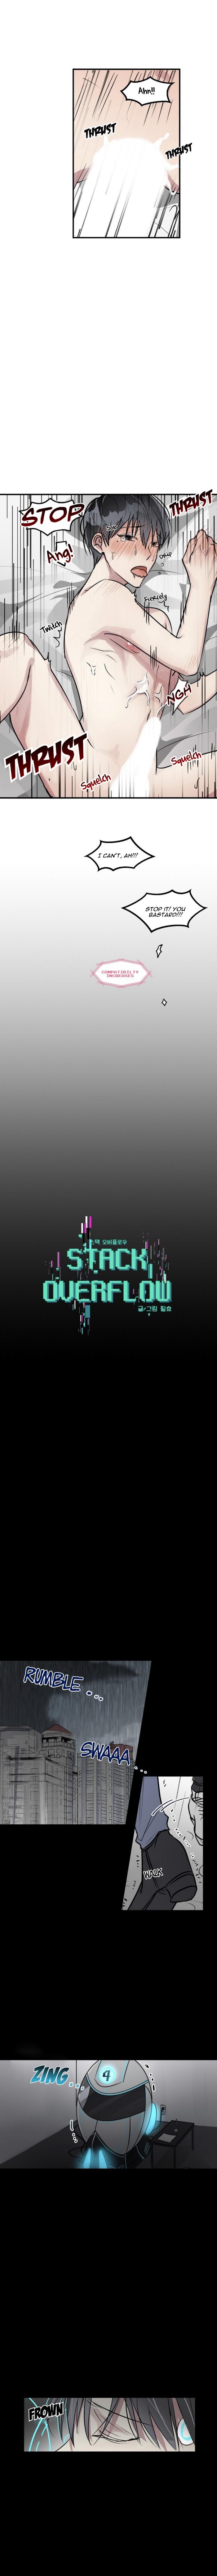 Stack Overflow Chapter 2 - Picture 3